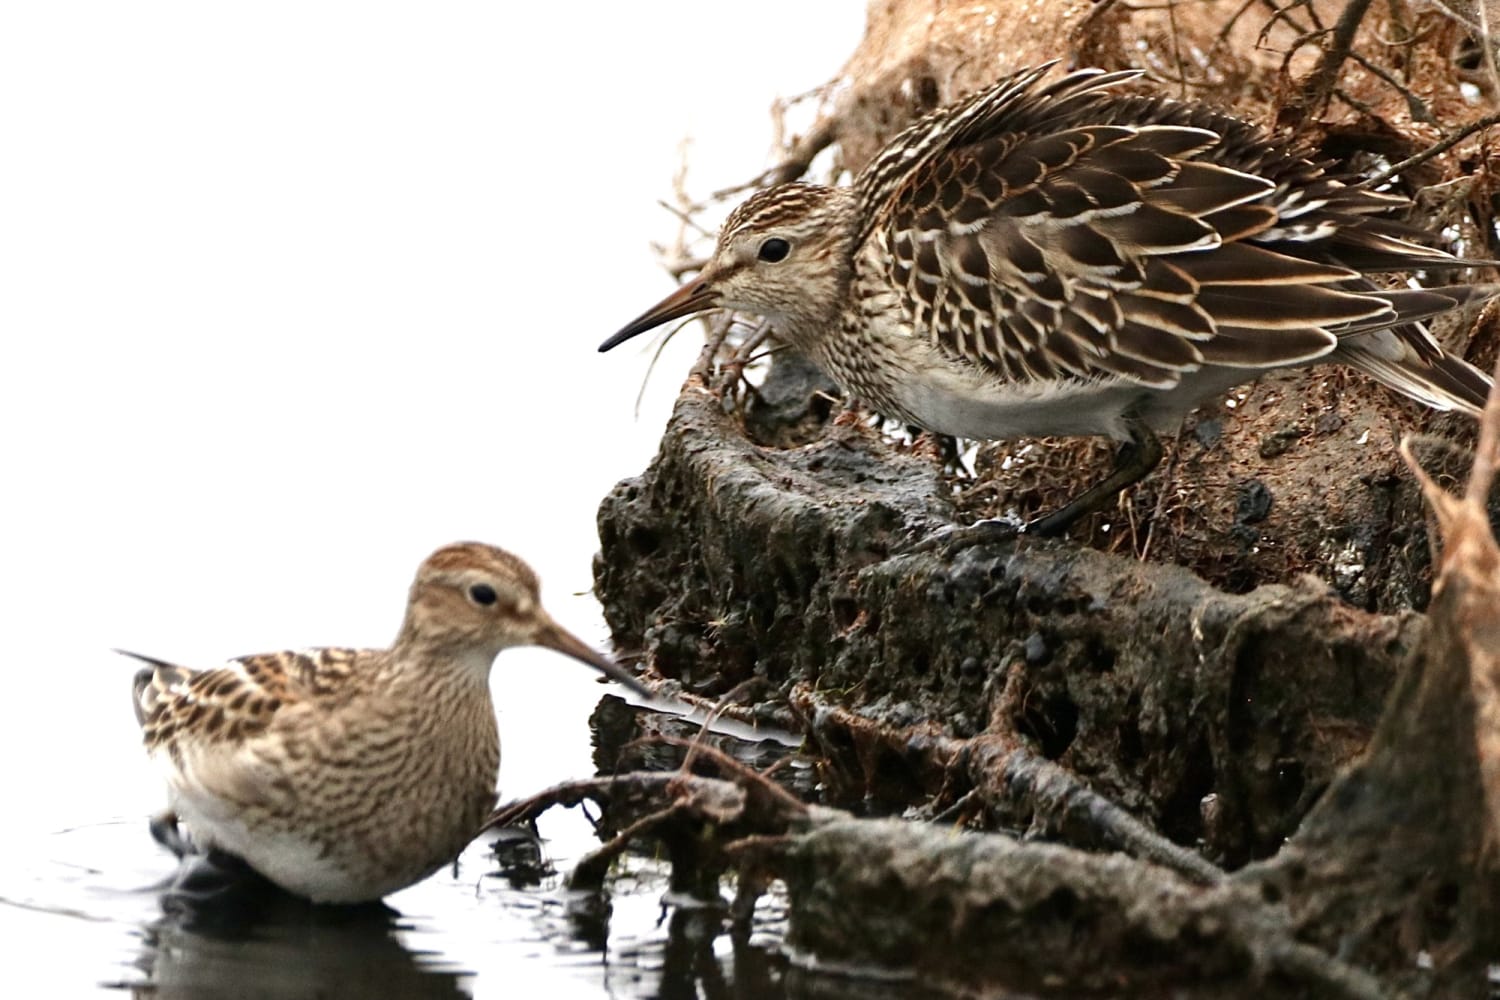 Pectoral Sandpipers nest from the tundra of easternmost Russia across Alaska and into northern Canada. A few migrate to Australasia for the winter, but most winter in southern South America. This means that some Pectoral Sandpipers make a round-trip migration of nearly 19,000 miles every year!